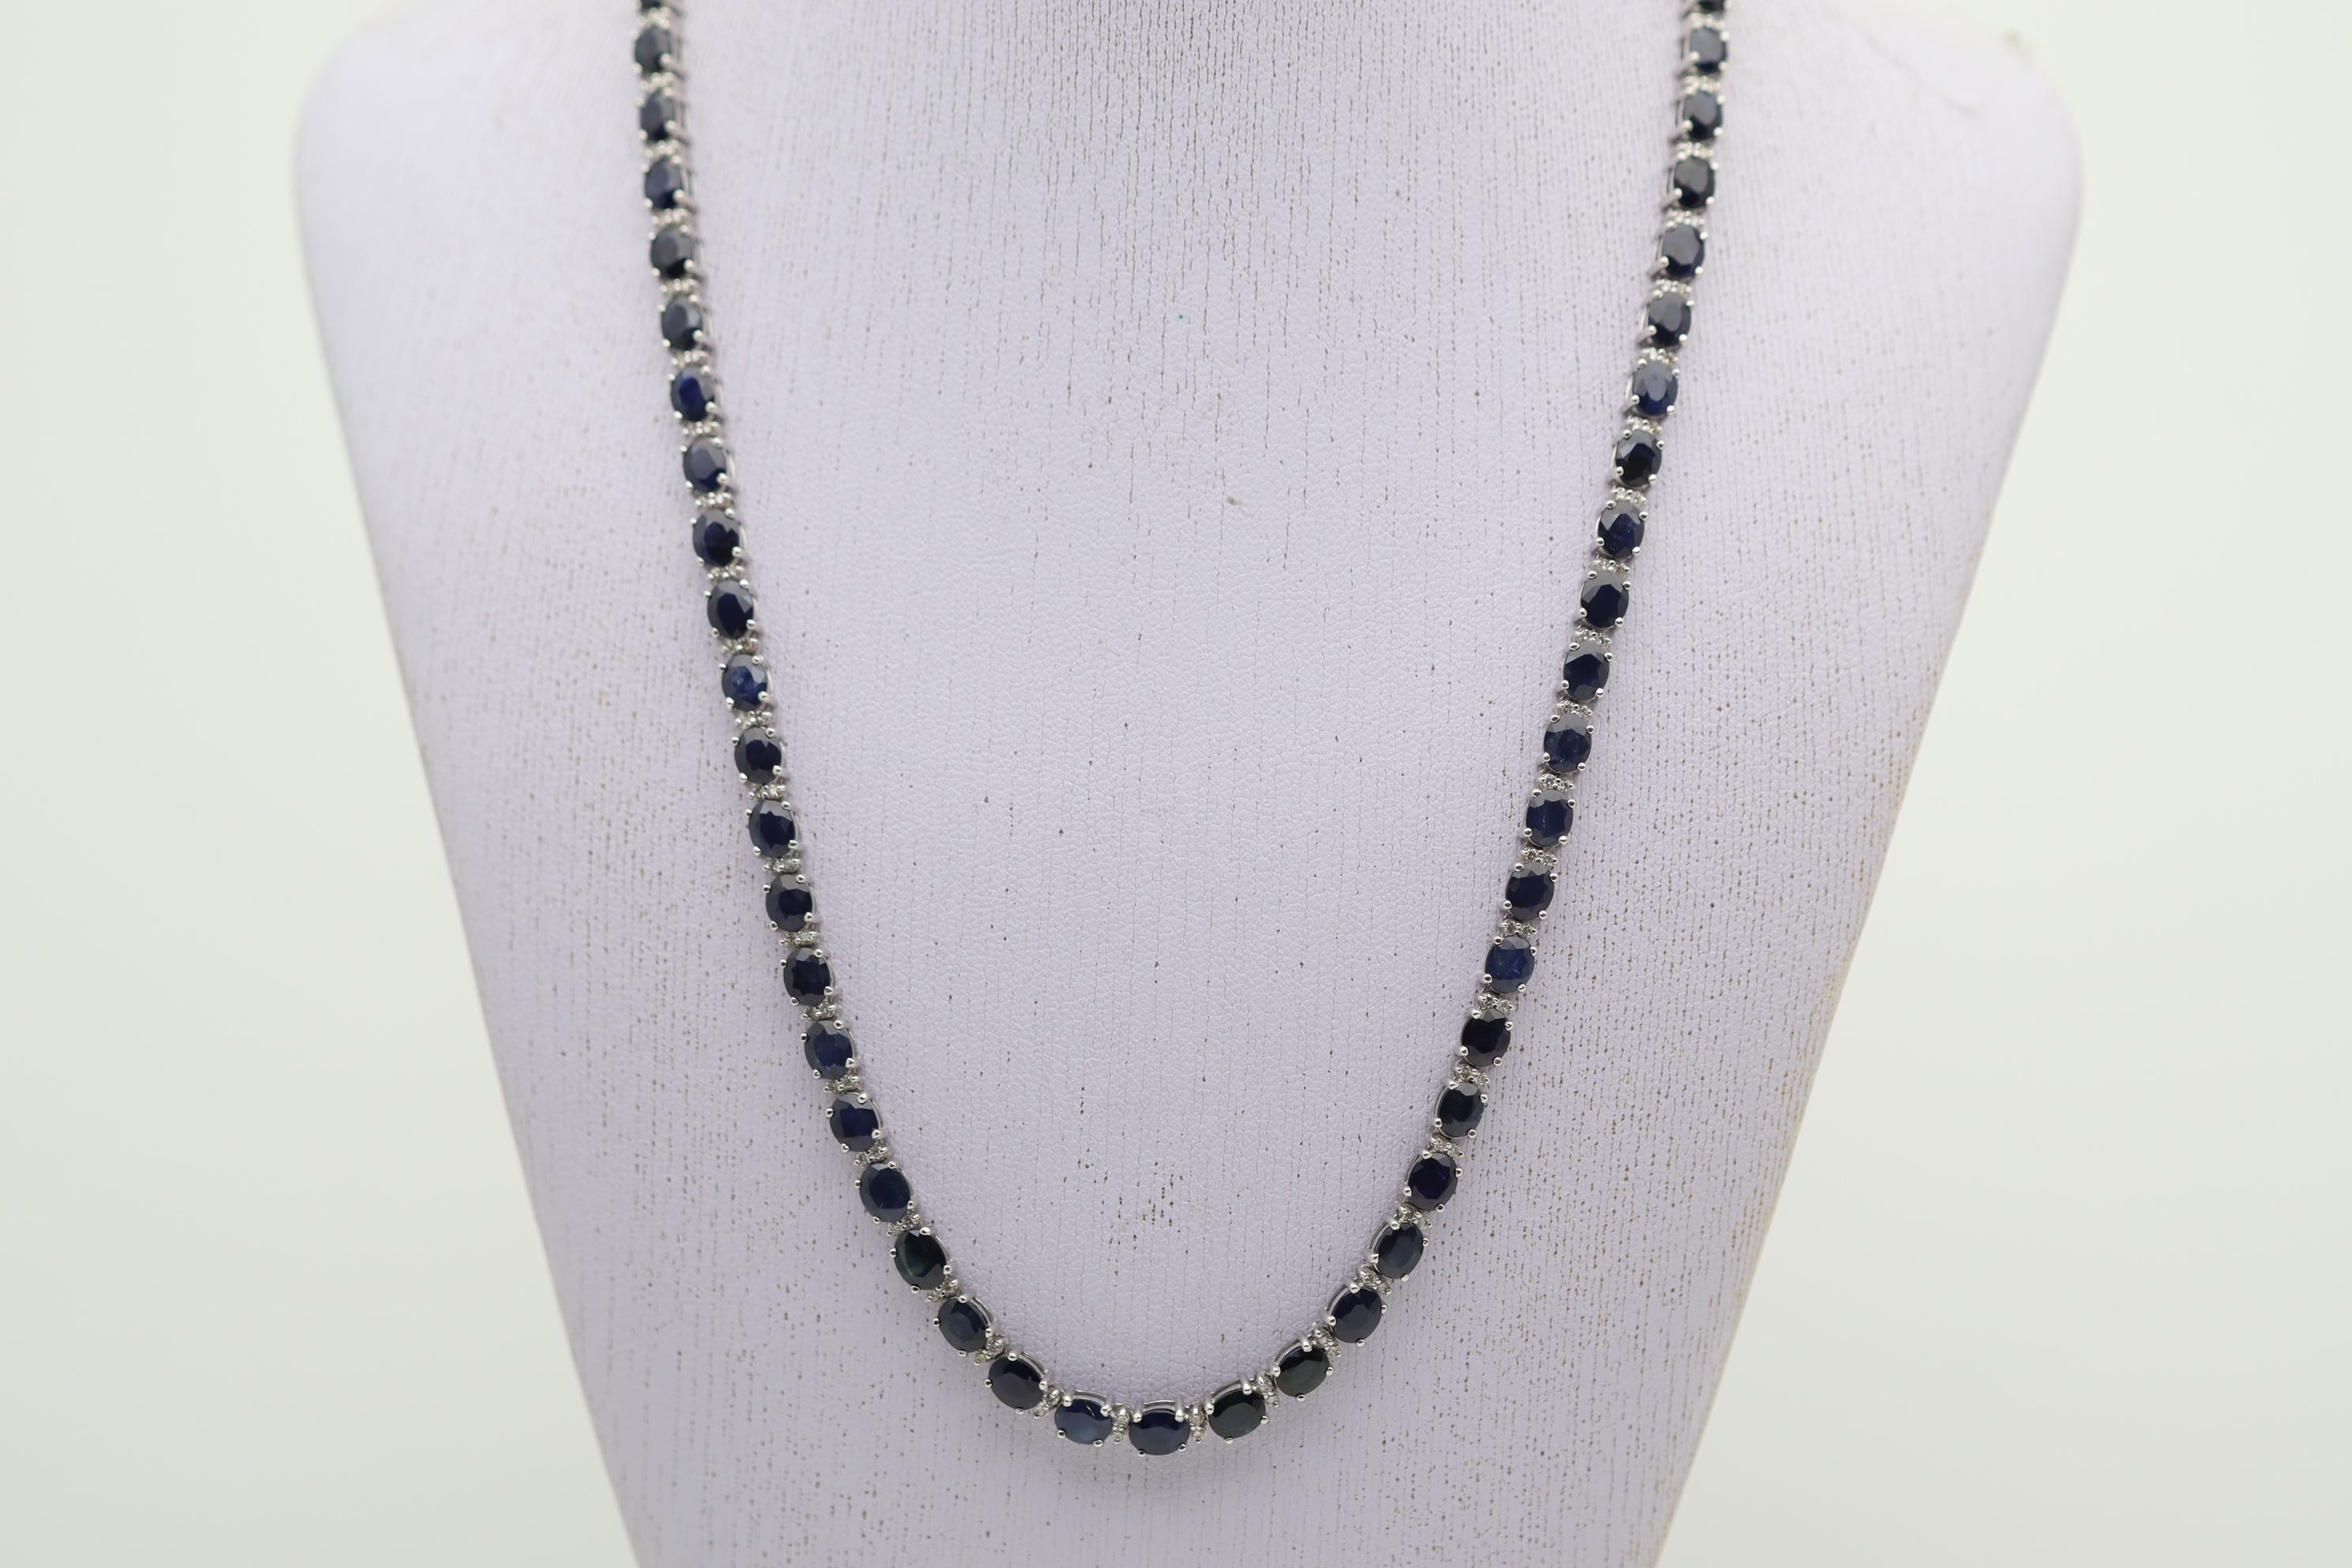 A classic and chic tennis necklace featuring a straight row of sapphires and diamonds. The sapphires weigh a total of 25 carats and have a rich deep blue color. They are complemented by 1.00 carat of round brilliant-cut diamonds set in pairs between